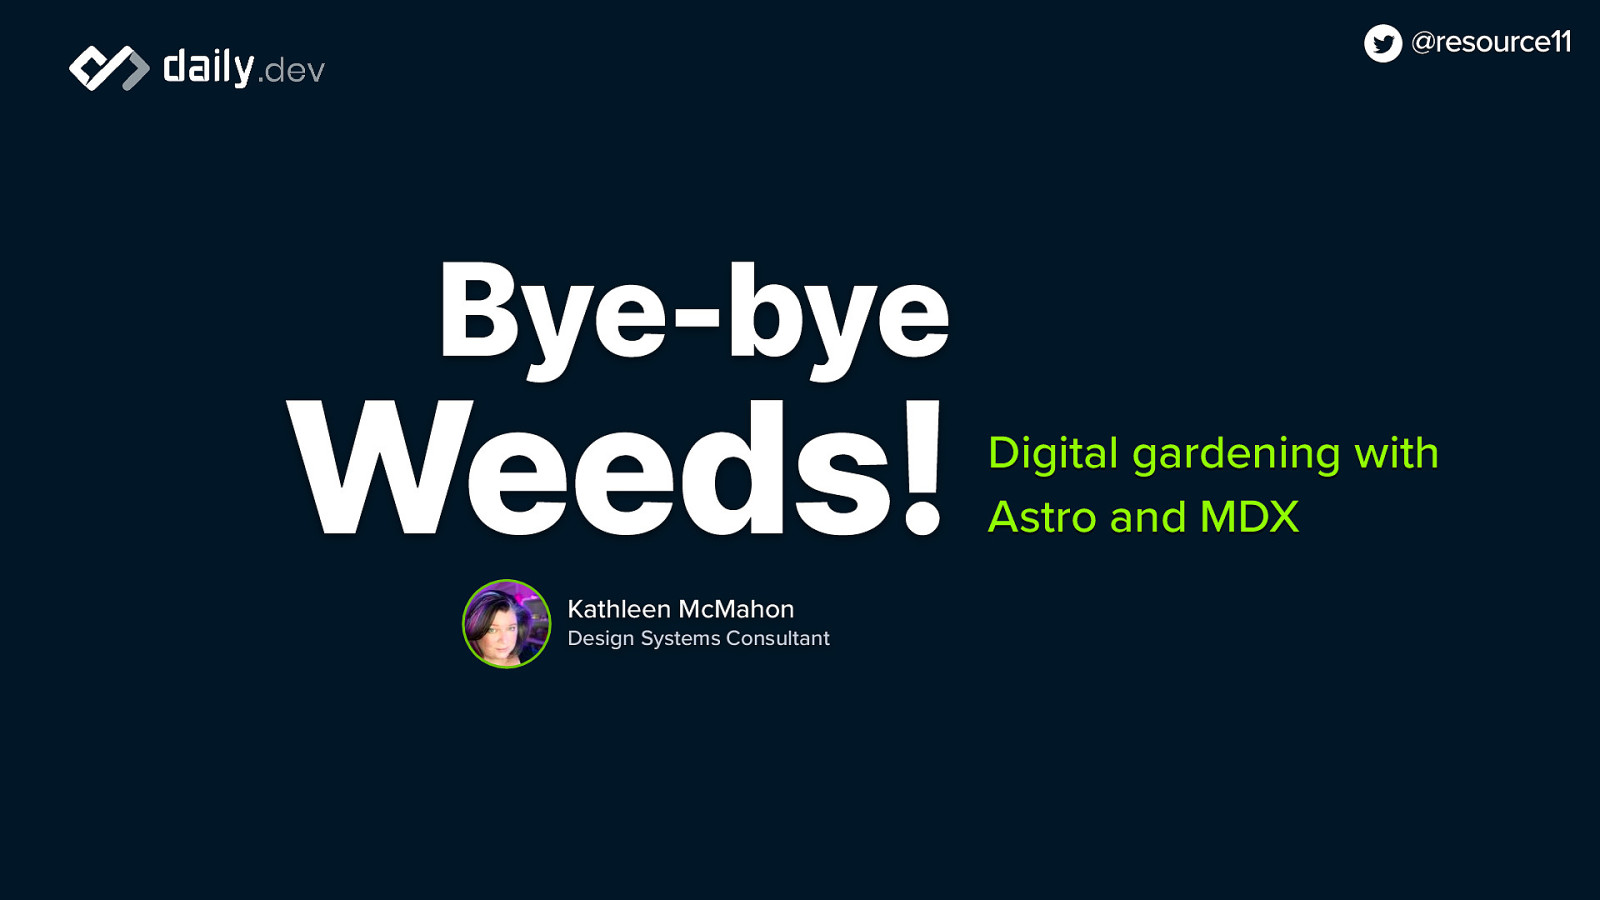  Bye-bye Weeds! Digital gardening with Astro and MDX — Kathleen McMahon — daily.dev